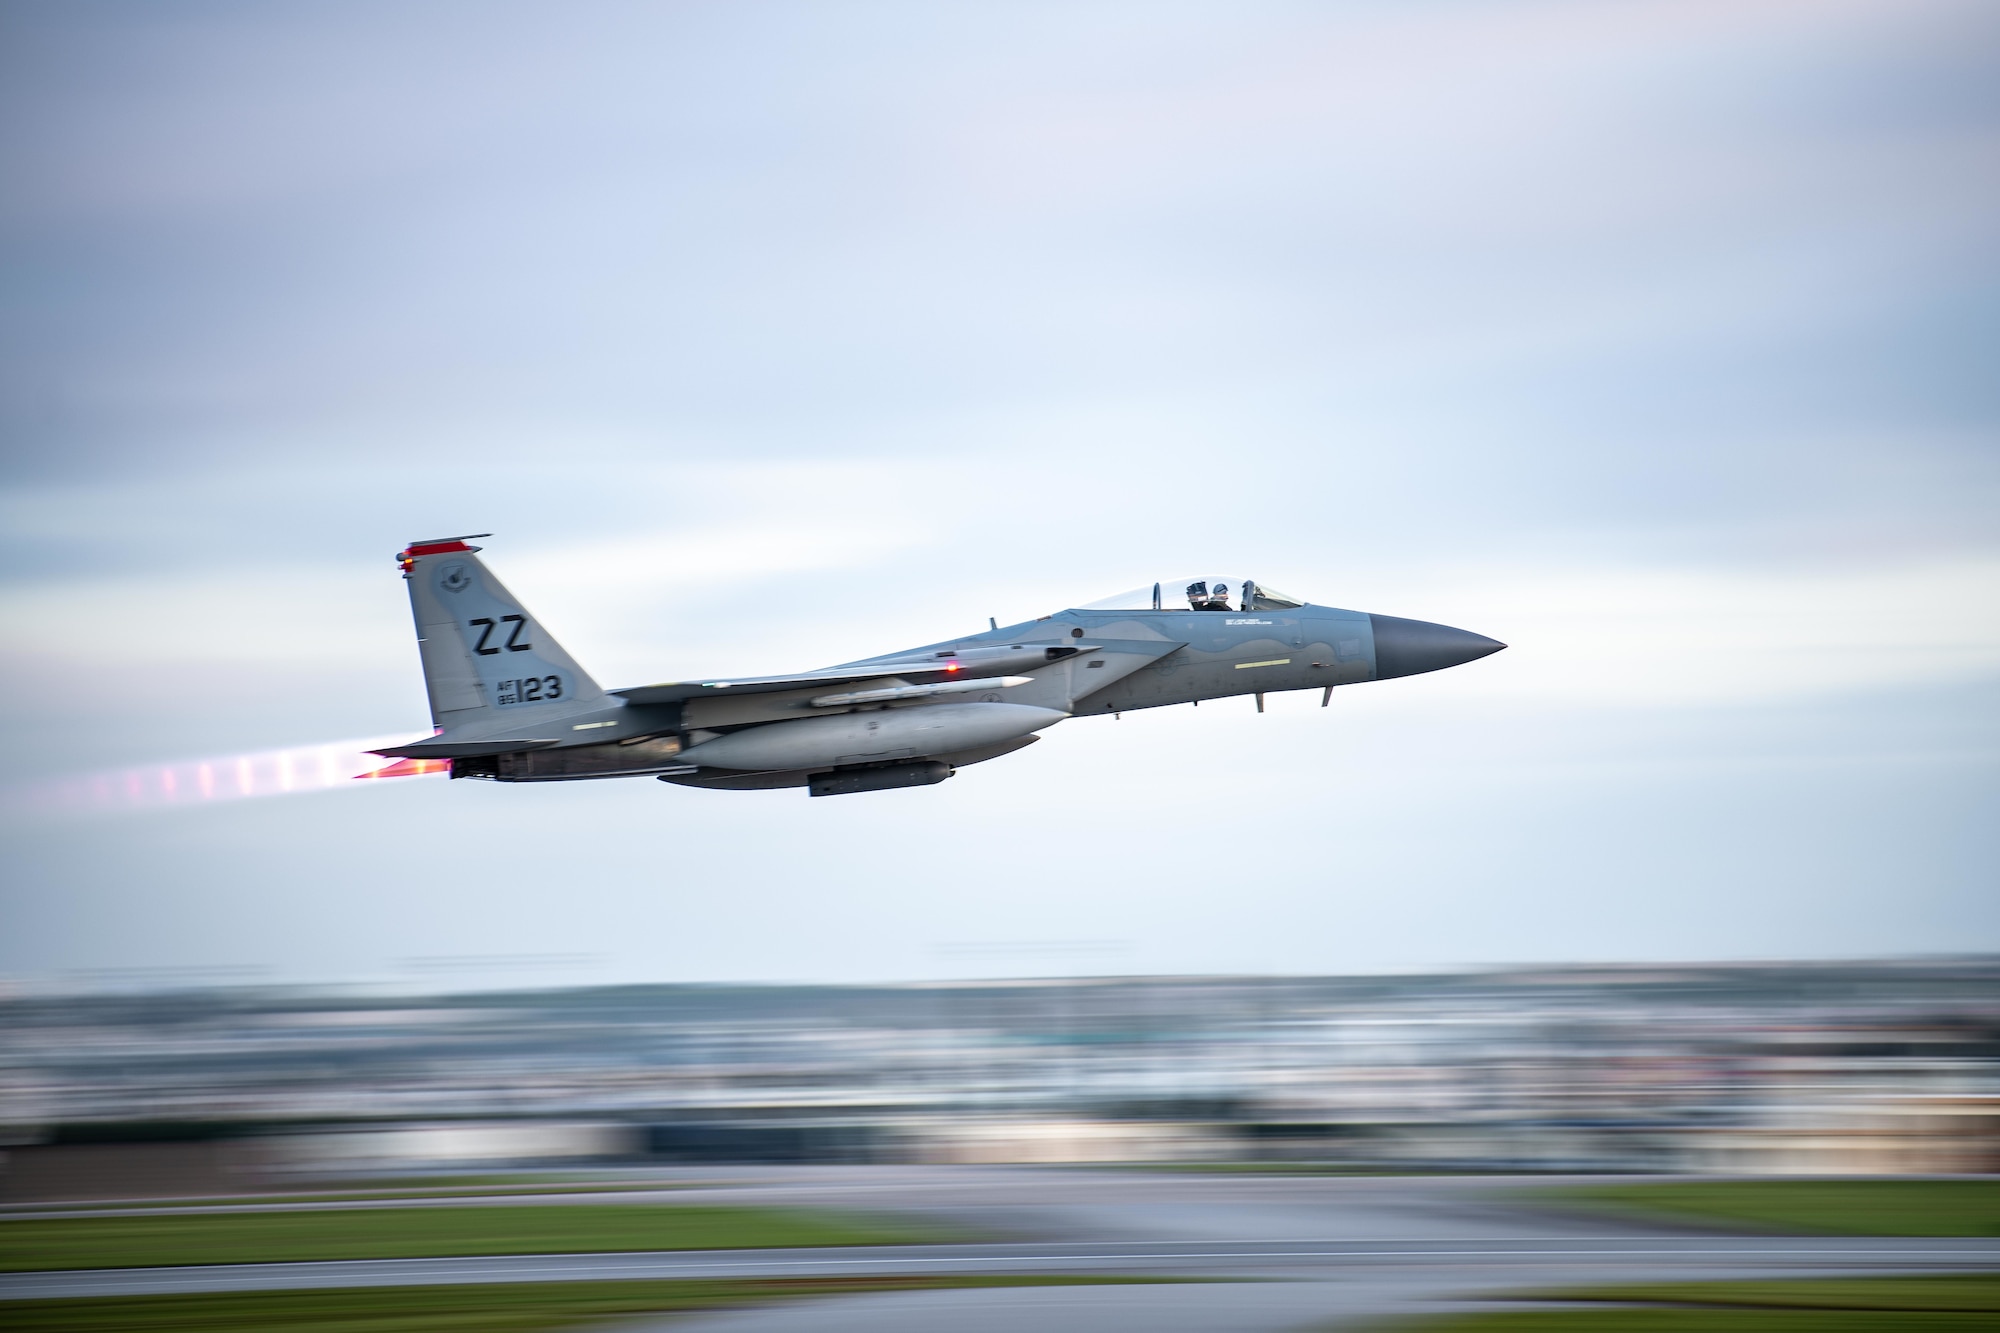 An F-15C Eagle assigned to the 67th Fighter Squadron takes off for Red Flag-Alaska at Kadena Air Base, Japan, April 15, 2022. The Indo-Pacific is a top priority for the United States, and the Department of Defense, through exercises like Red Flag-Alaska, is committed to ensuring U.S. forces are capable and ready to face the evolving challenges in the region. (U.S. Air Force photo by Airman 1st Class Sebastian Romawac)